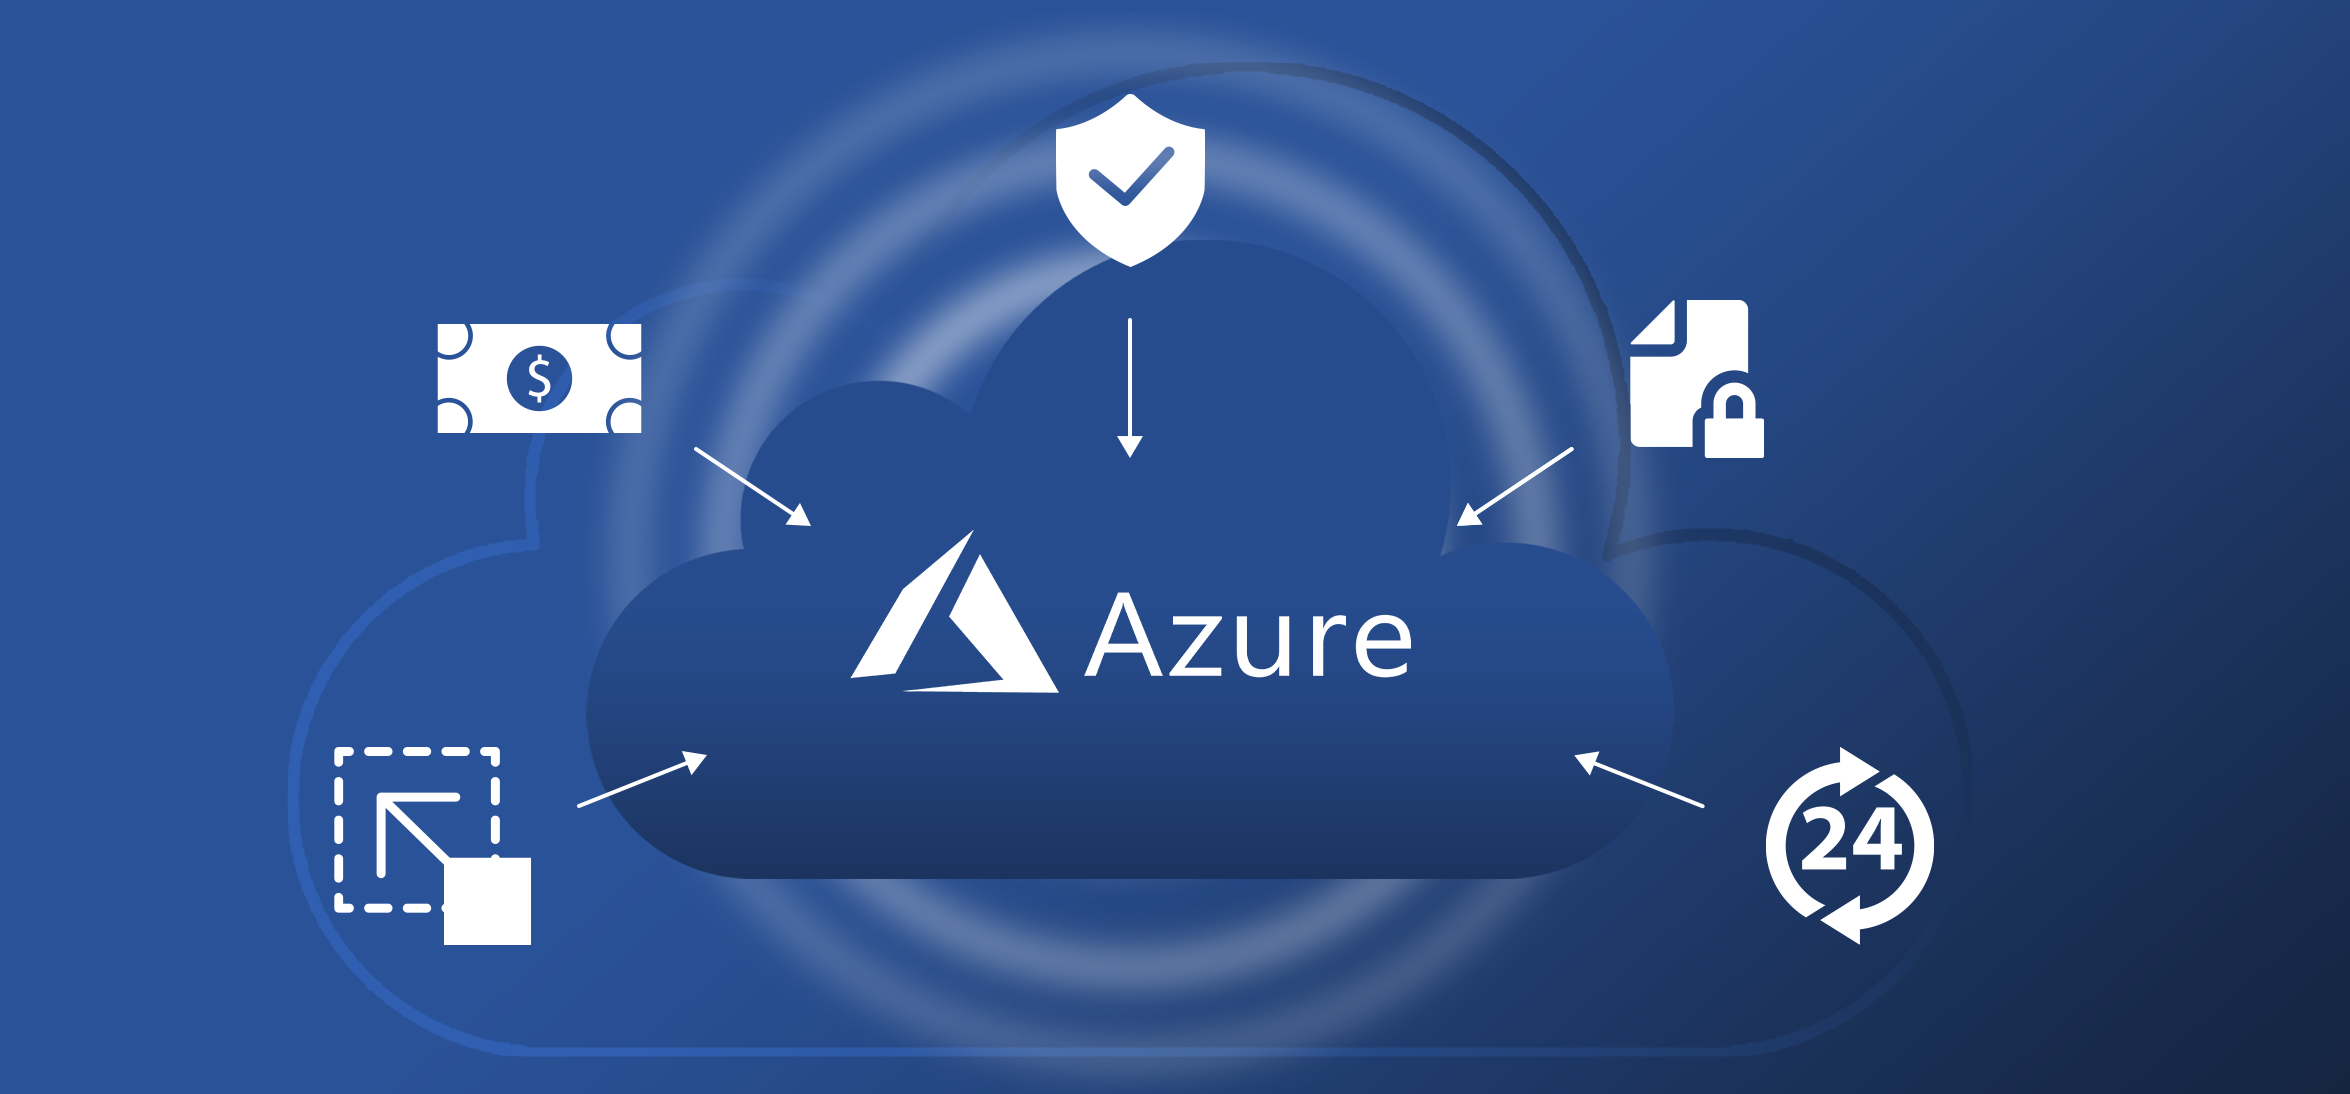 Microsoft Azure Administration and Consulting Services in Imperial Beach CA, 91932